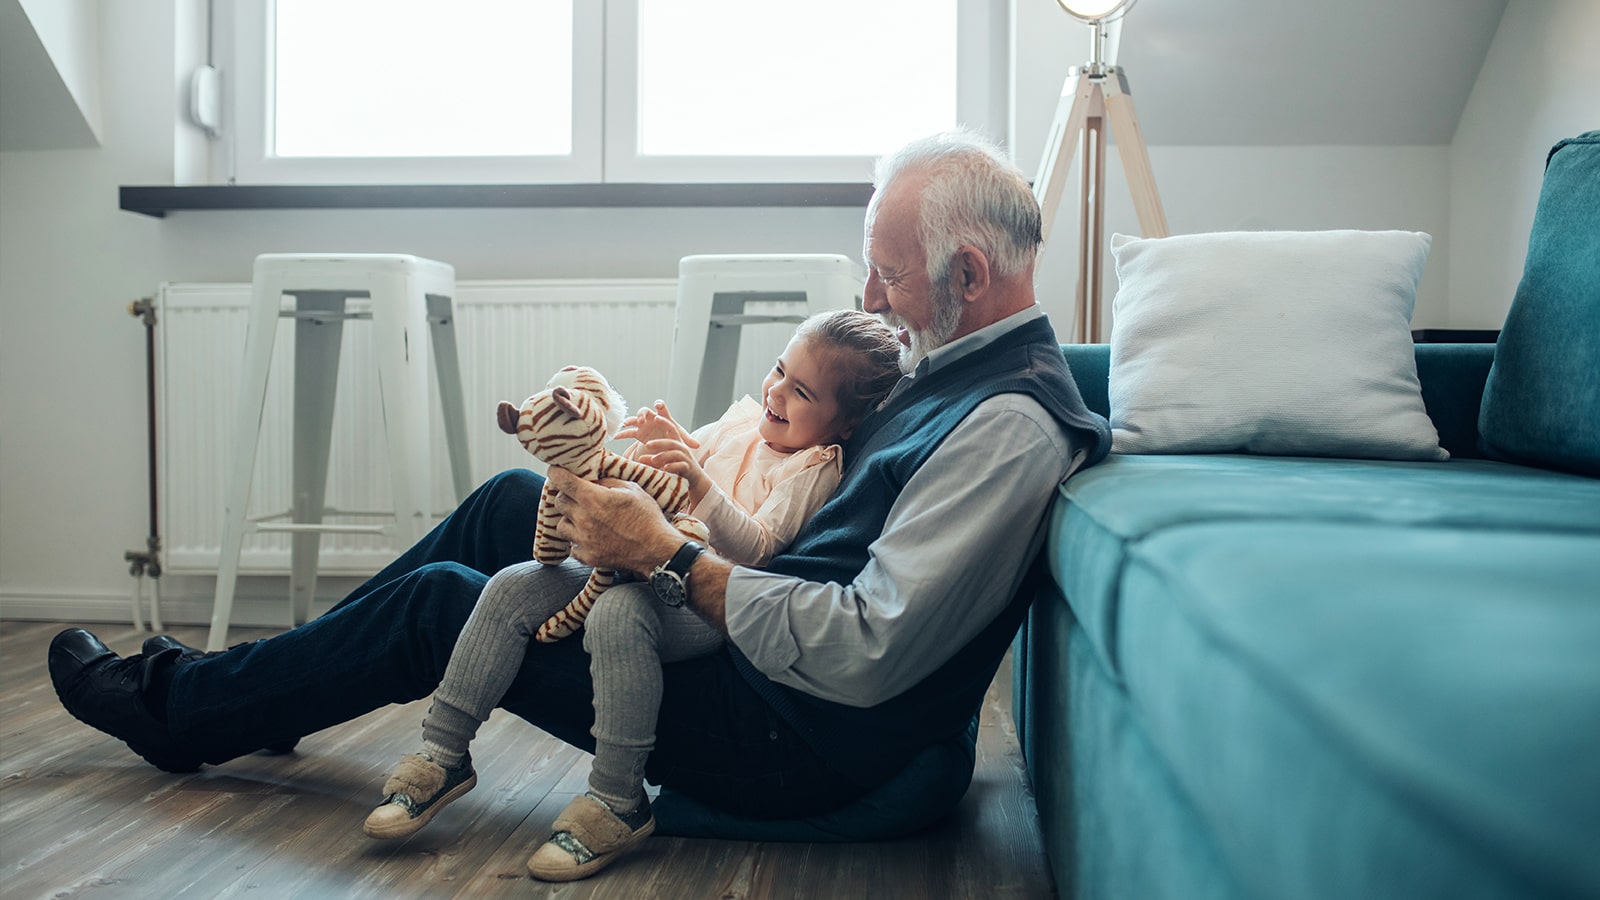 Grandfather and grandchild play with a stuffed animal